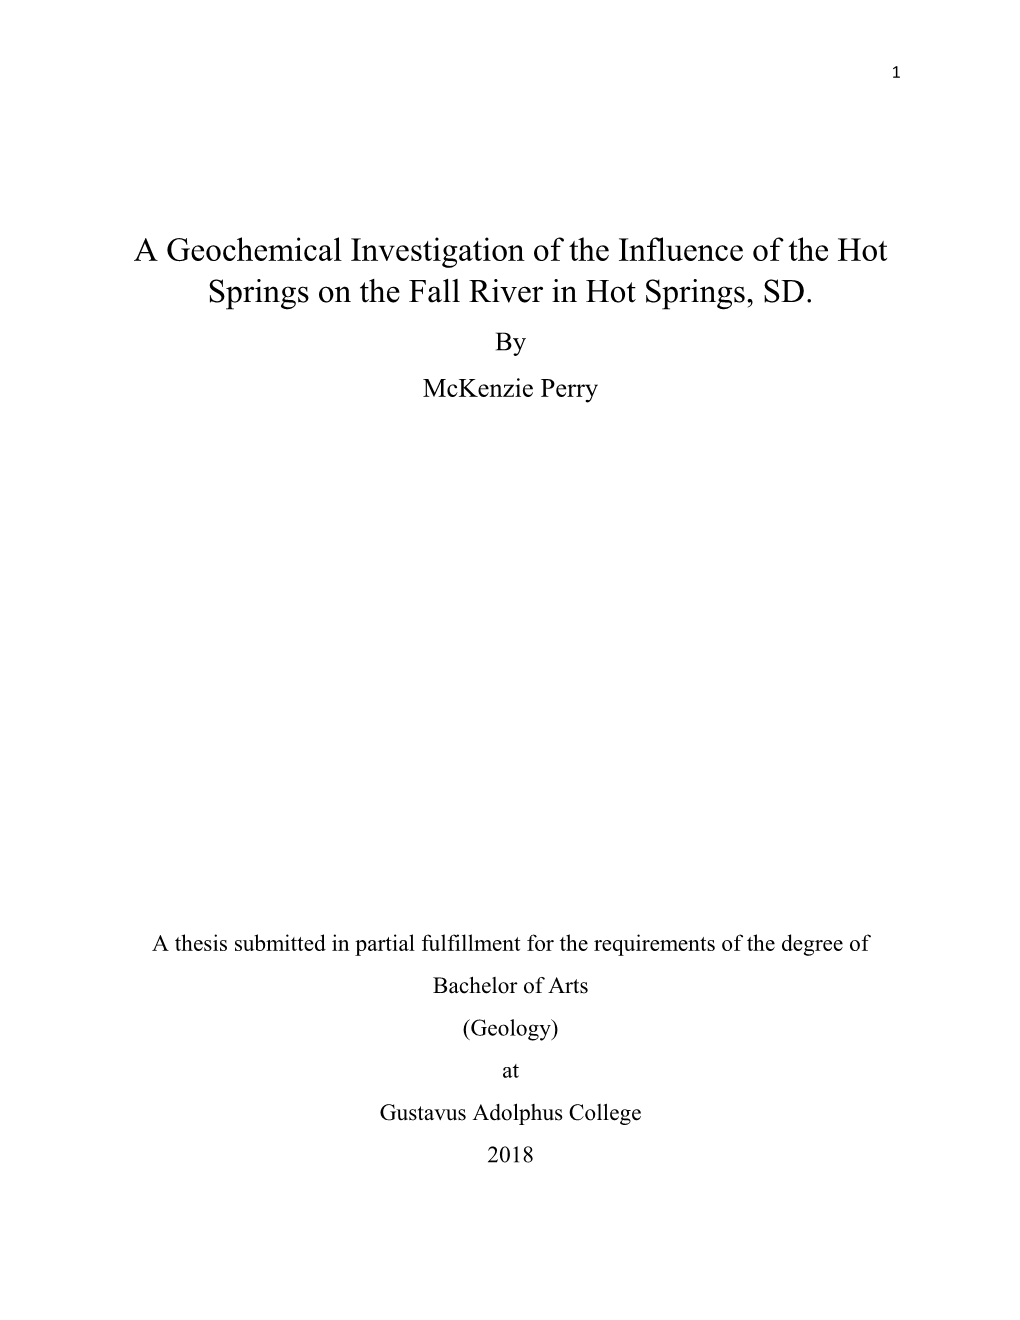 A Geochemical Investigation of the Influence of the Hot Springs on the Fall River in Hot Springs, SD